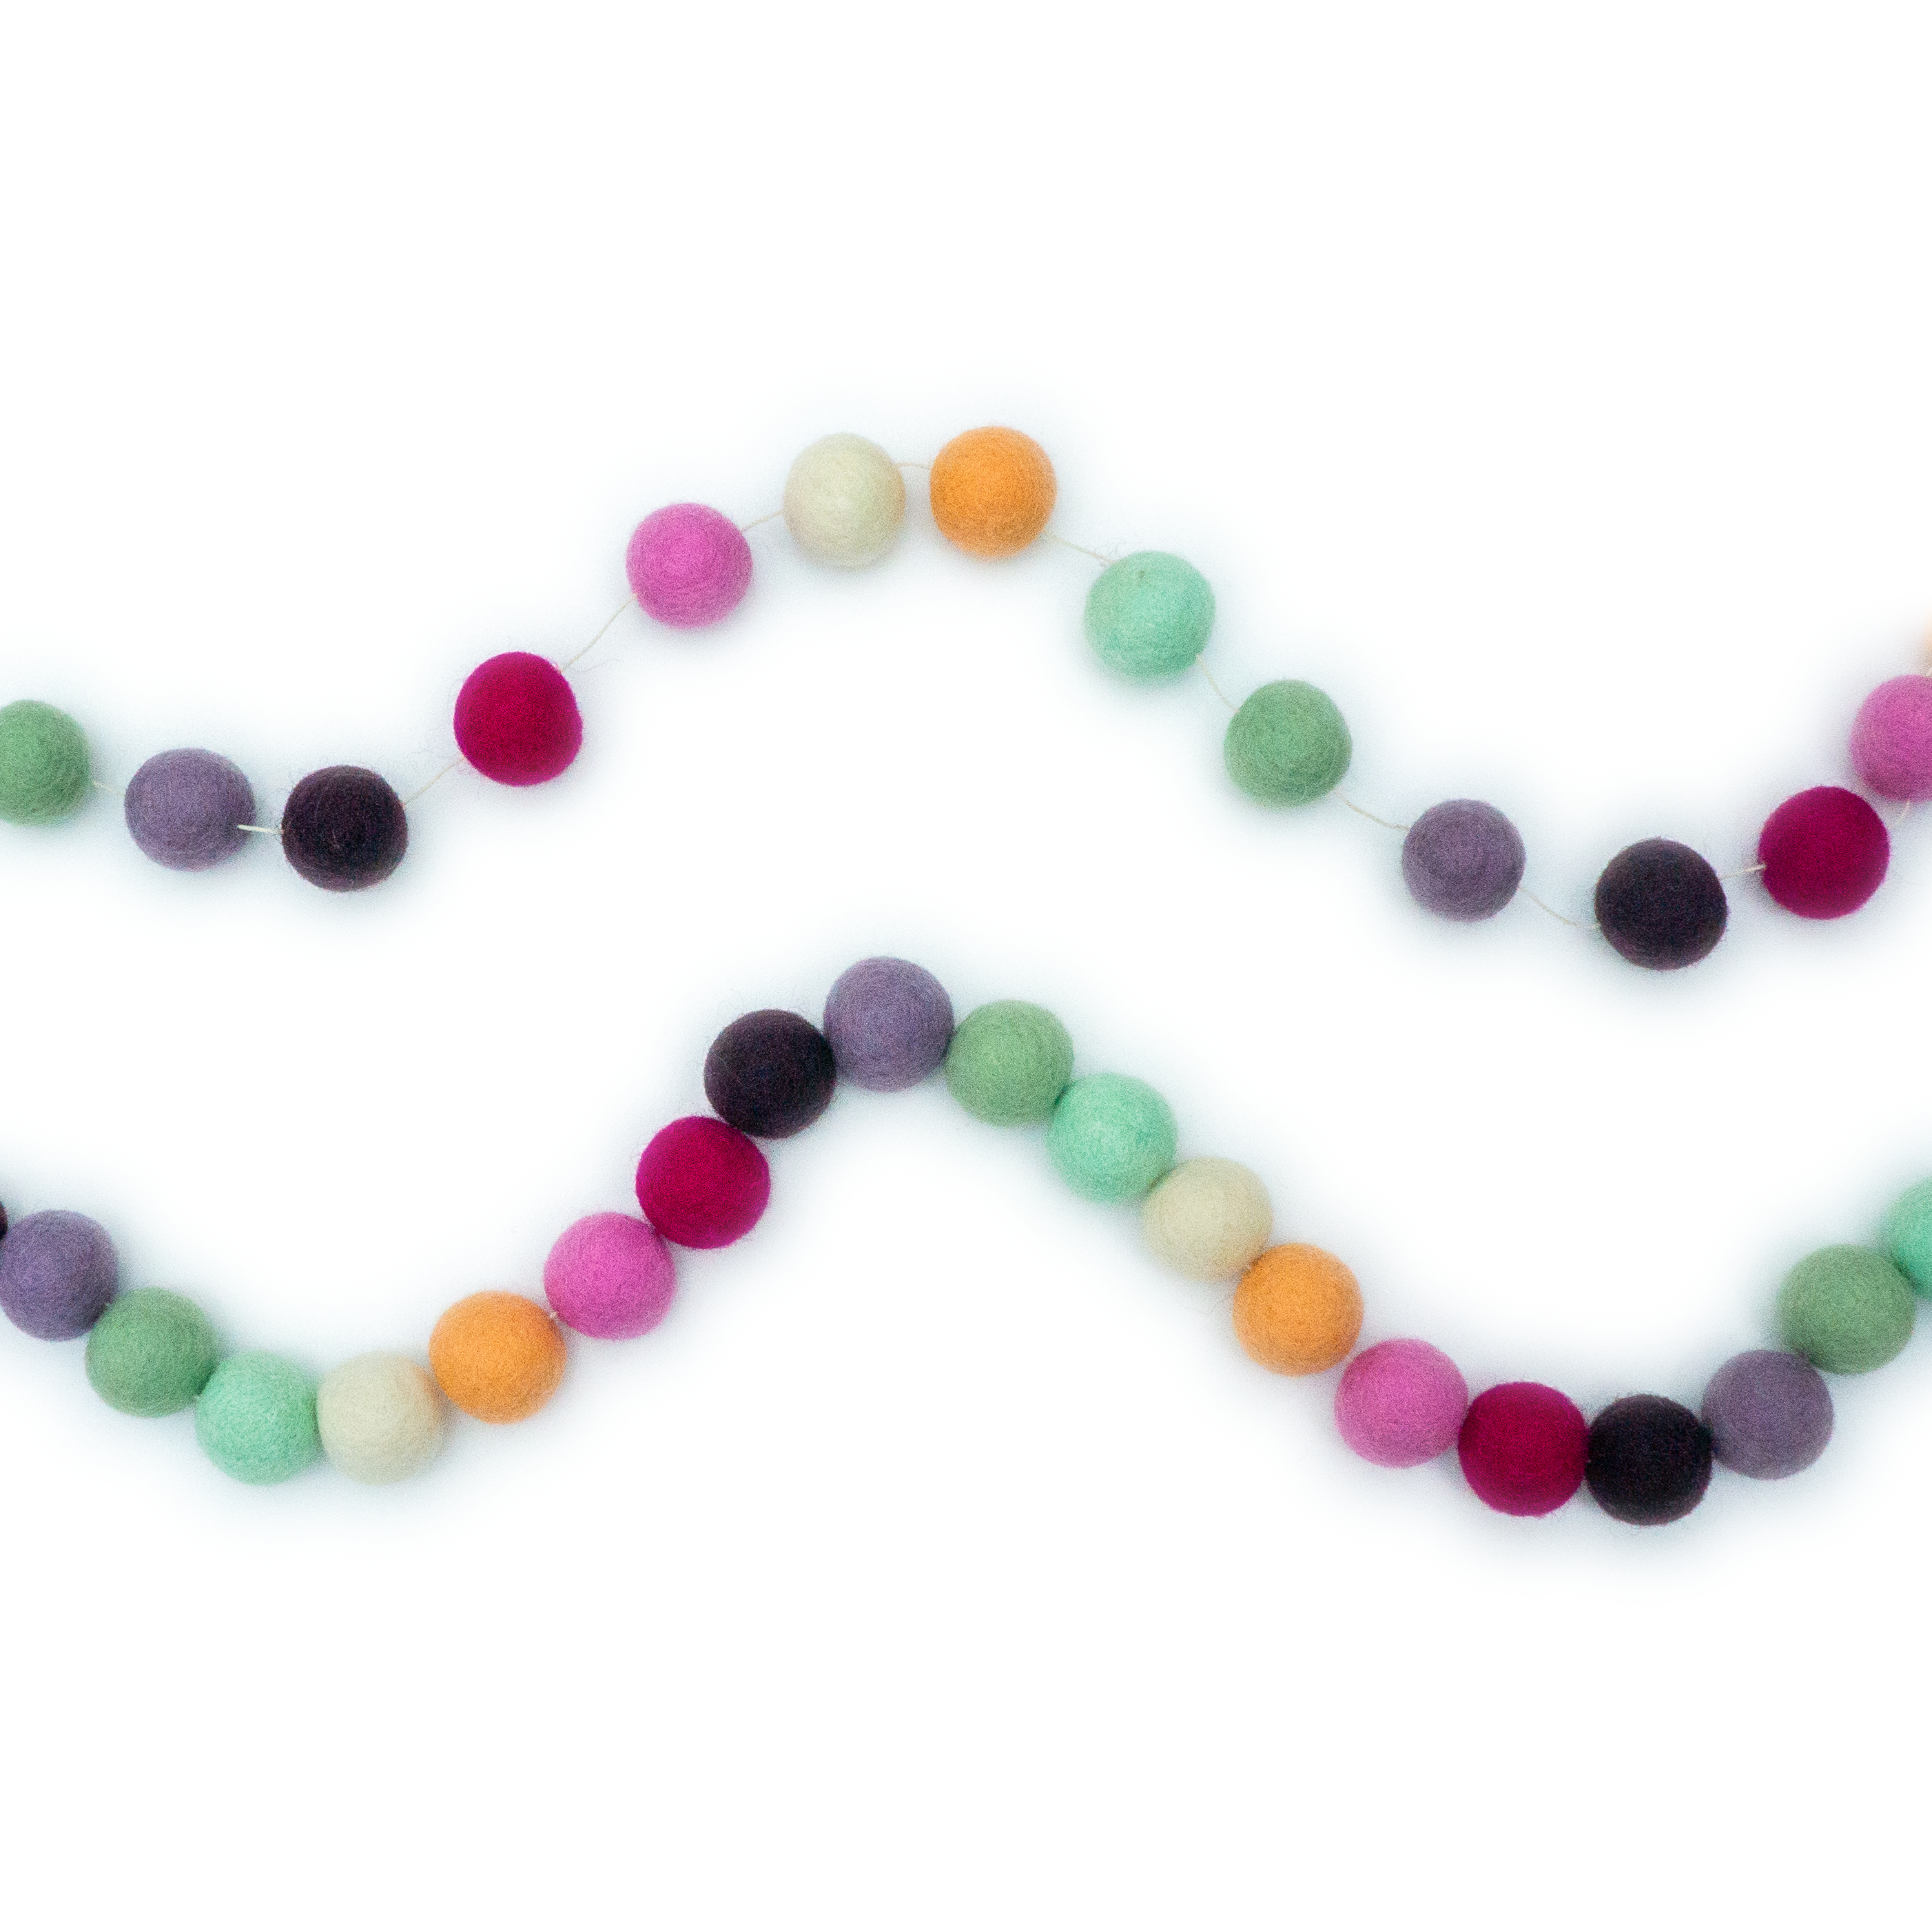 Macarons Eco Garlands/Ornaments: XL - 84 beads/25ft (1" beads)